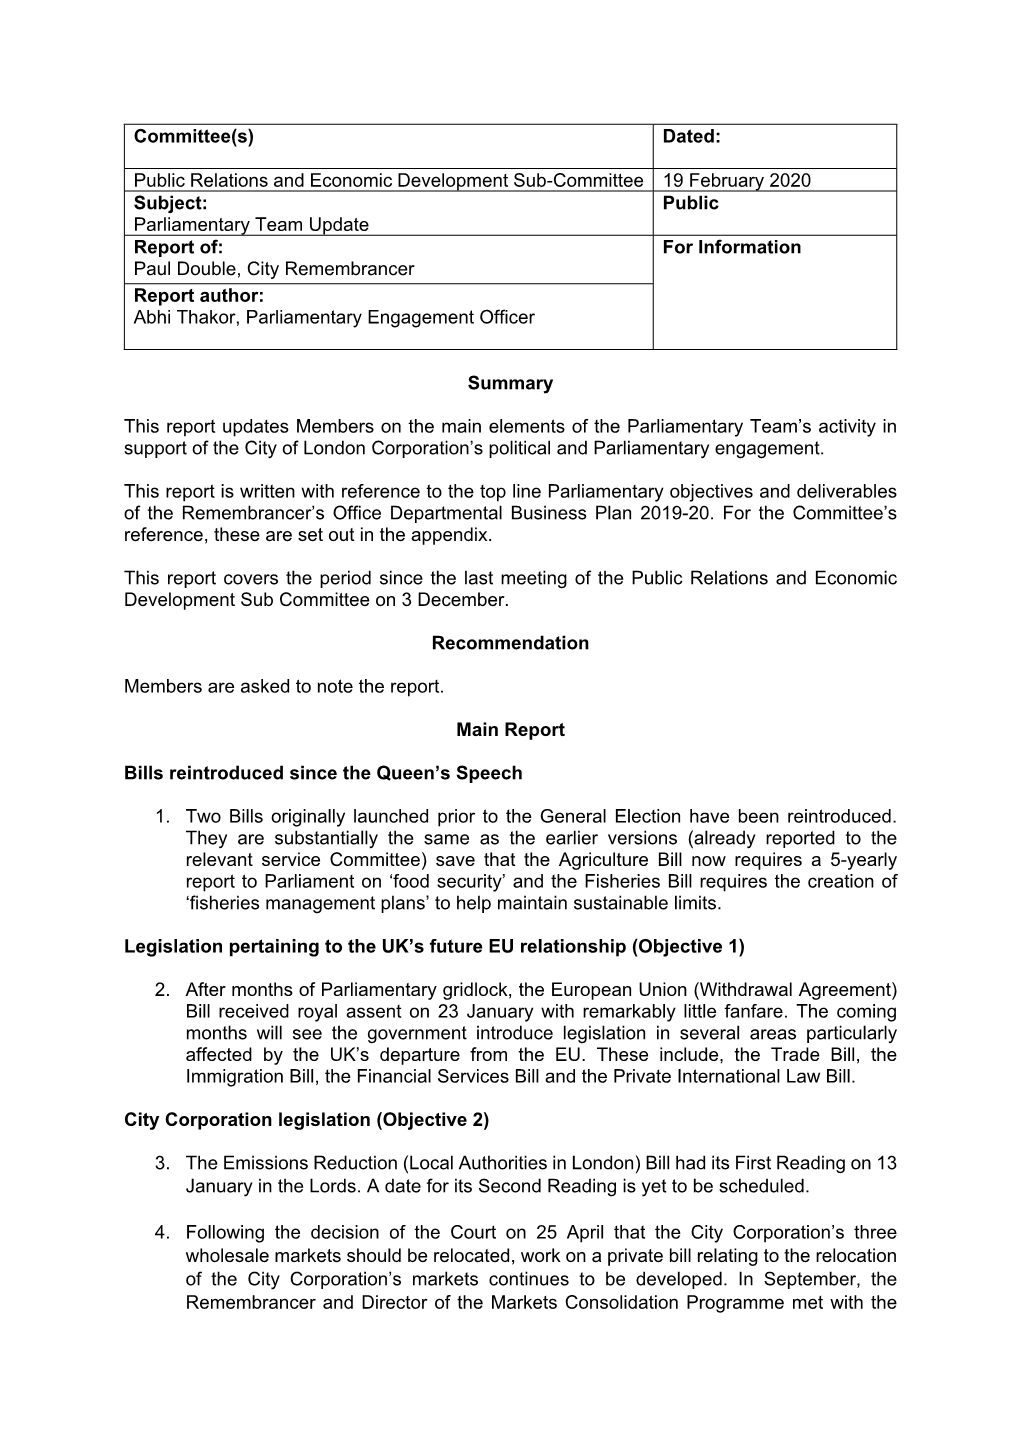 Parliamentary Team Update Report Of: for Information Paul Double, City Remembrancer Report Author: Abhi Thakor, Parliamentary Engagement Officer